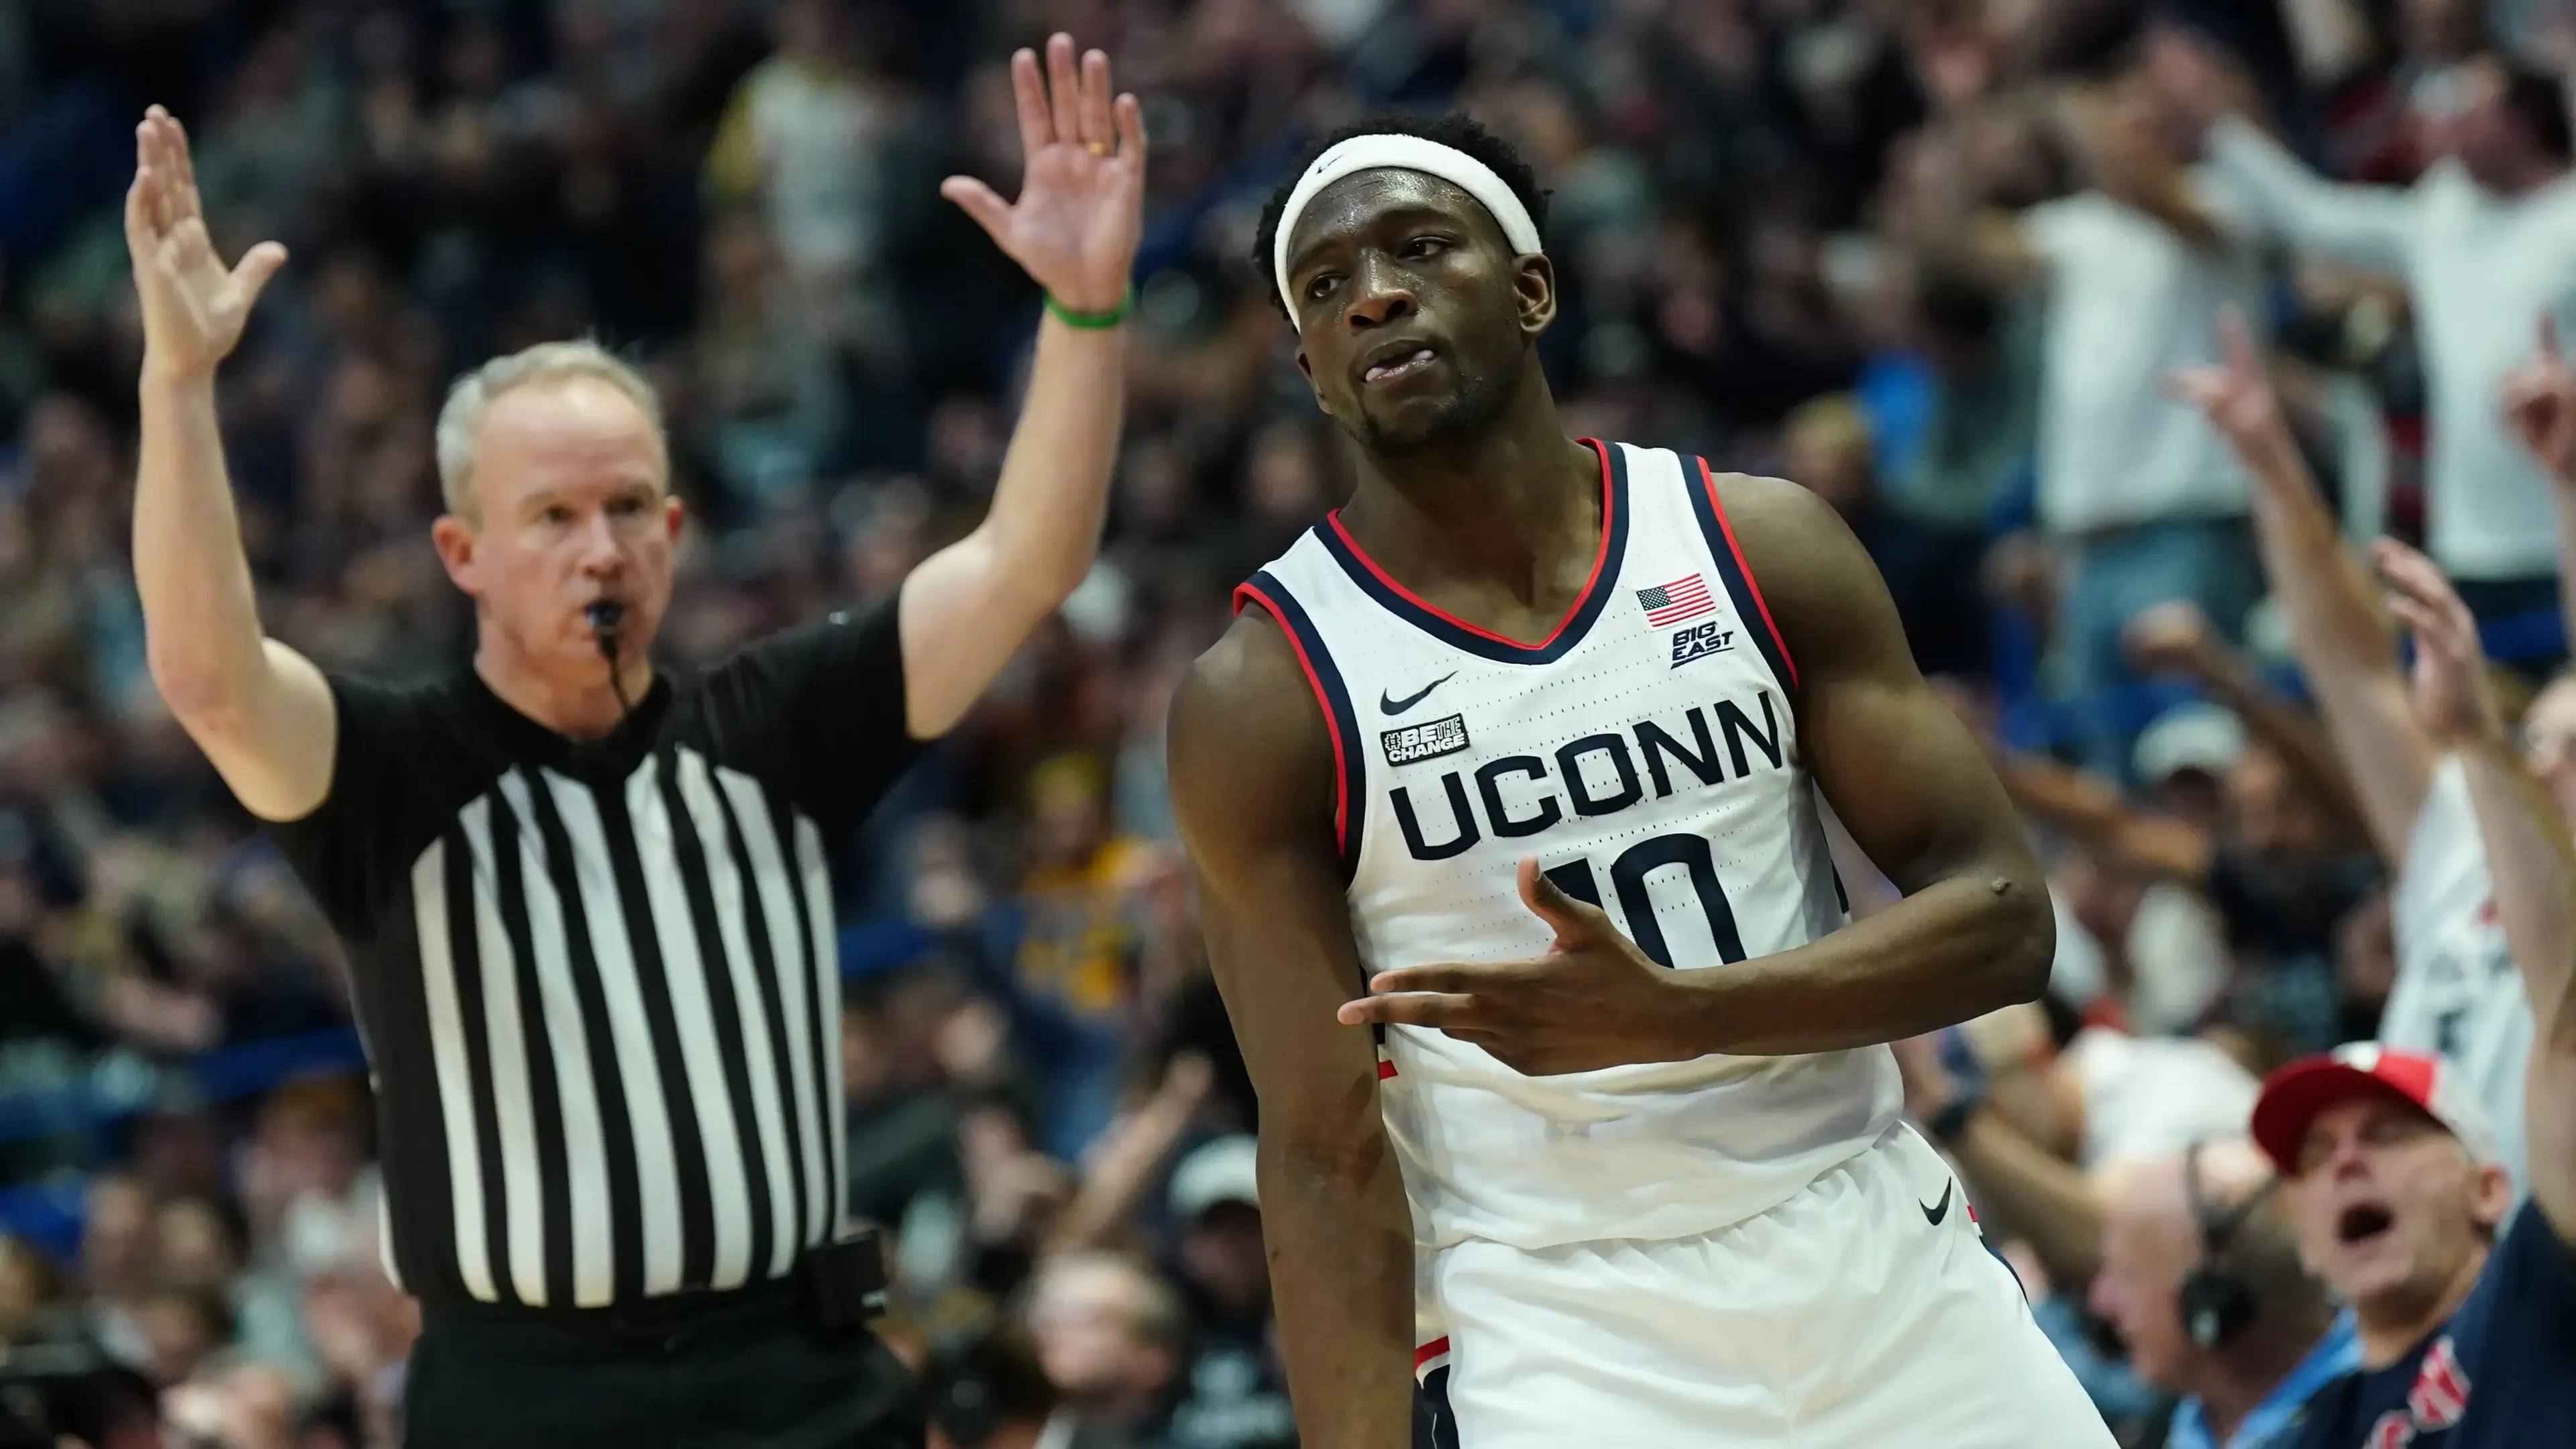 UConn Huskies guard Hassan Diarra (10) reacts after his three point basket against the Marquette Golden Eagles in the second half at XL Center / David Butler II - USA TODAY Sports